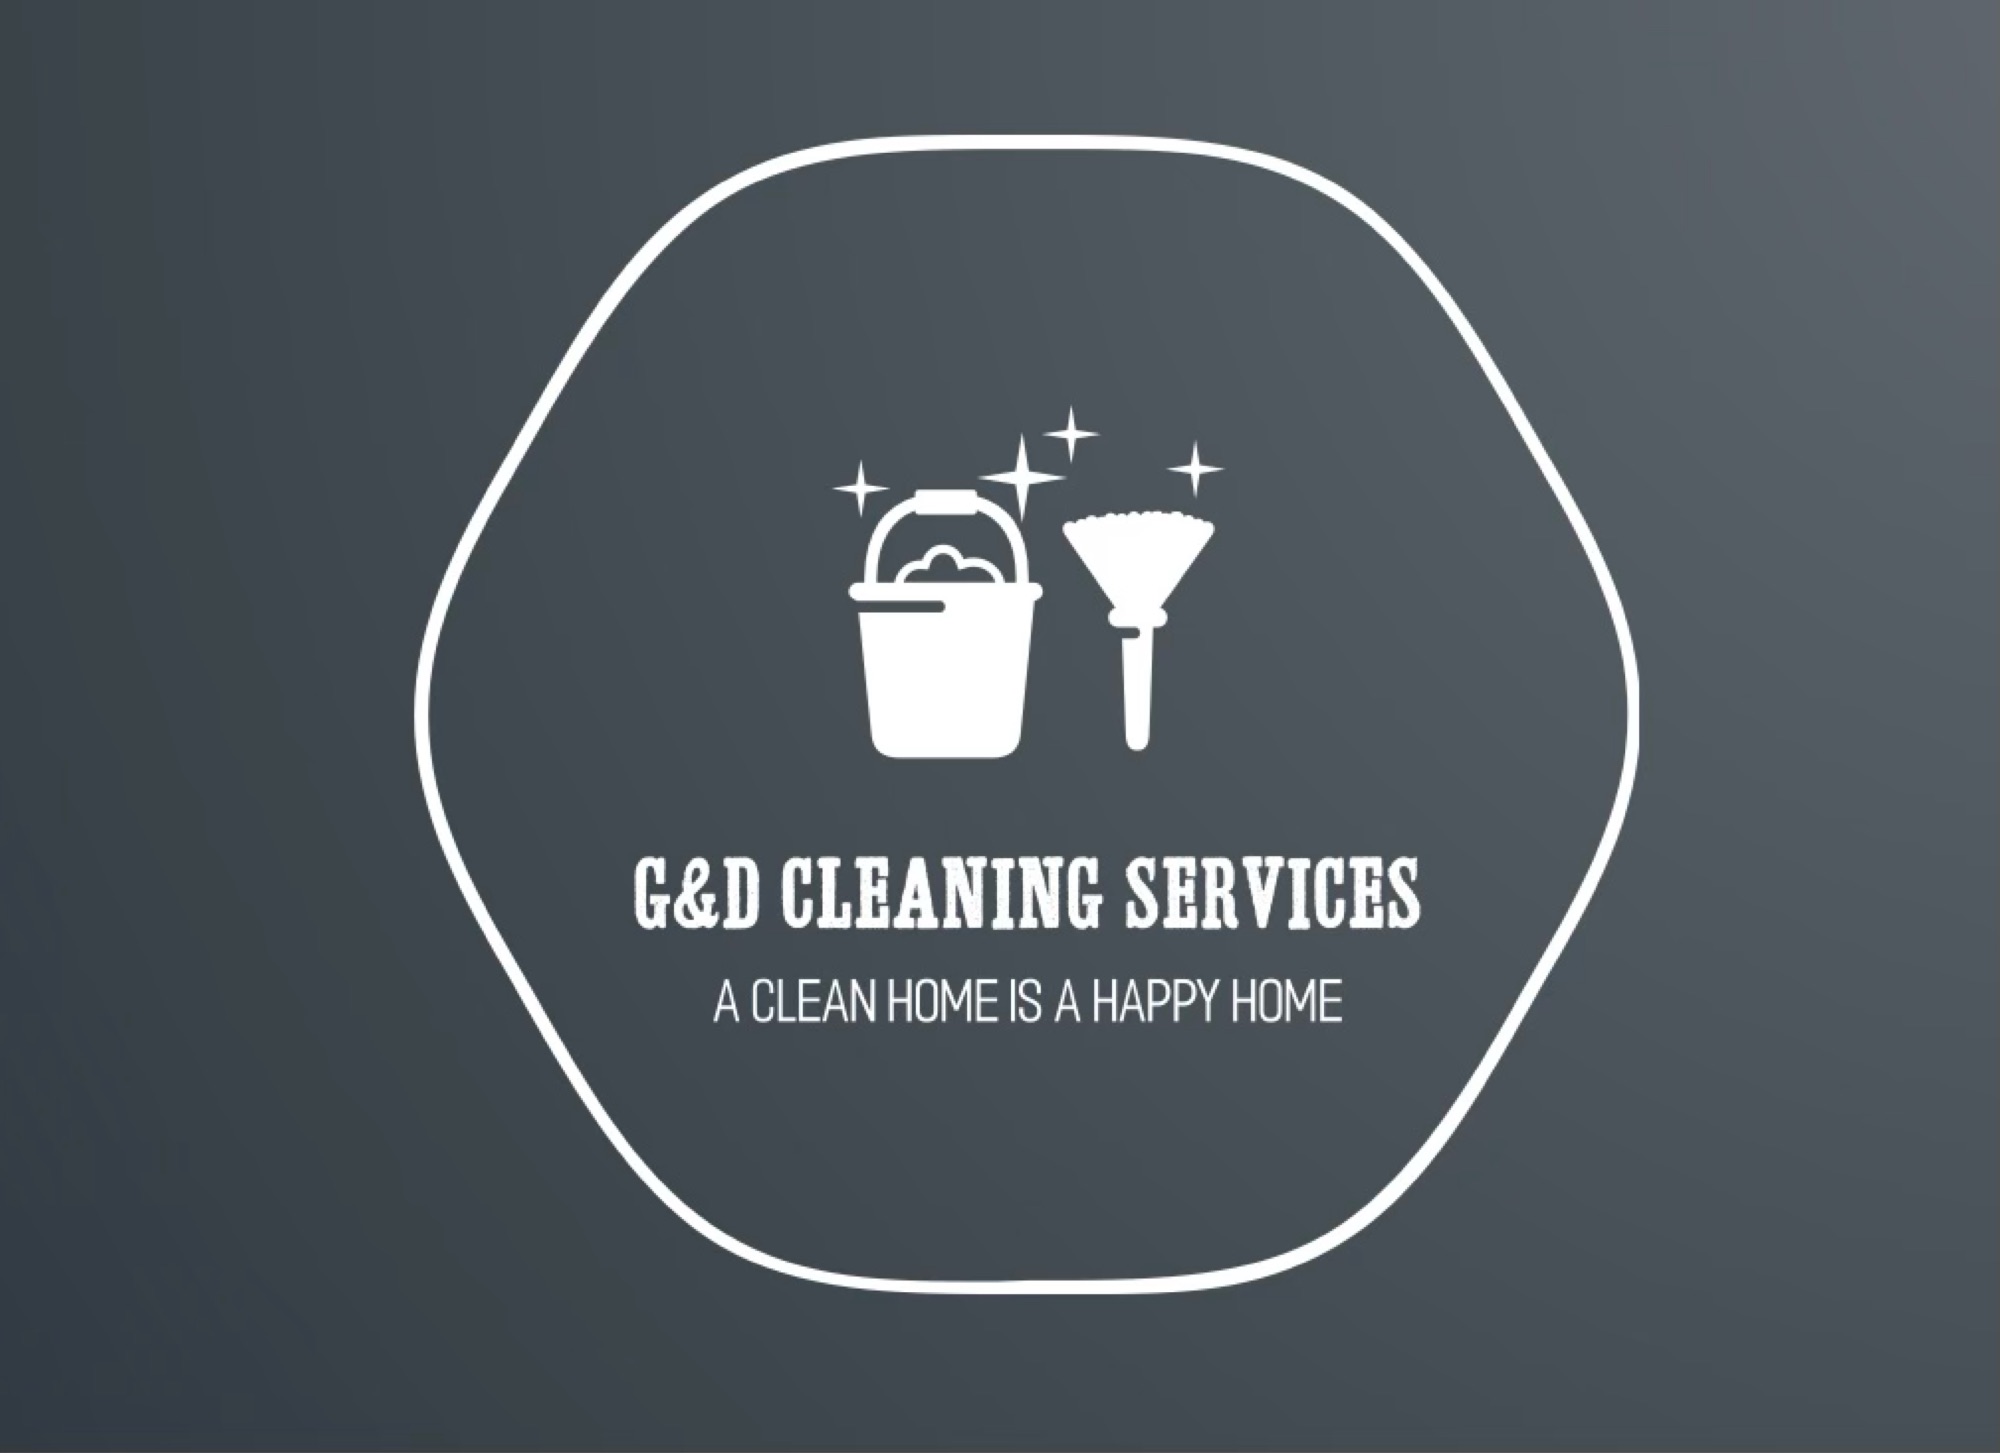 G and D Cleaning Services Logo